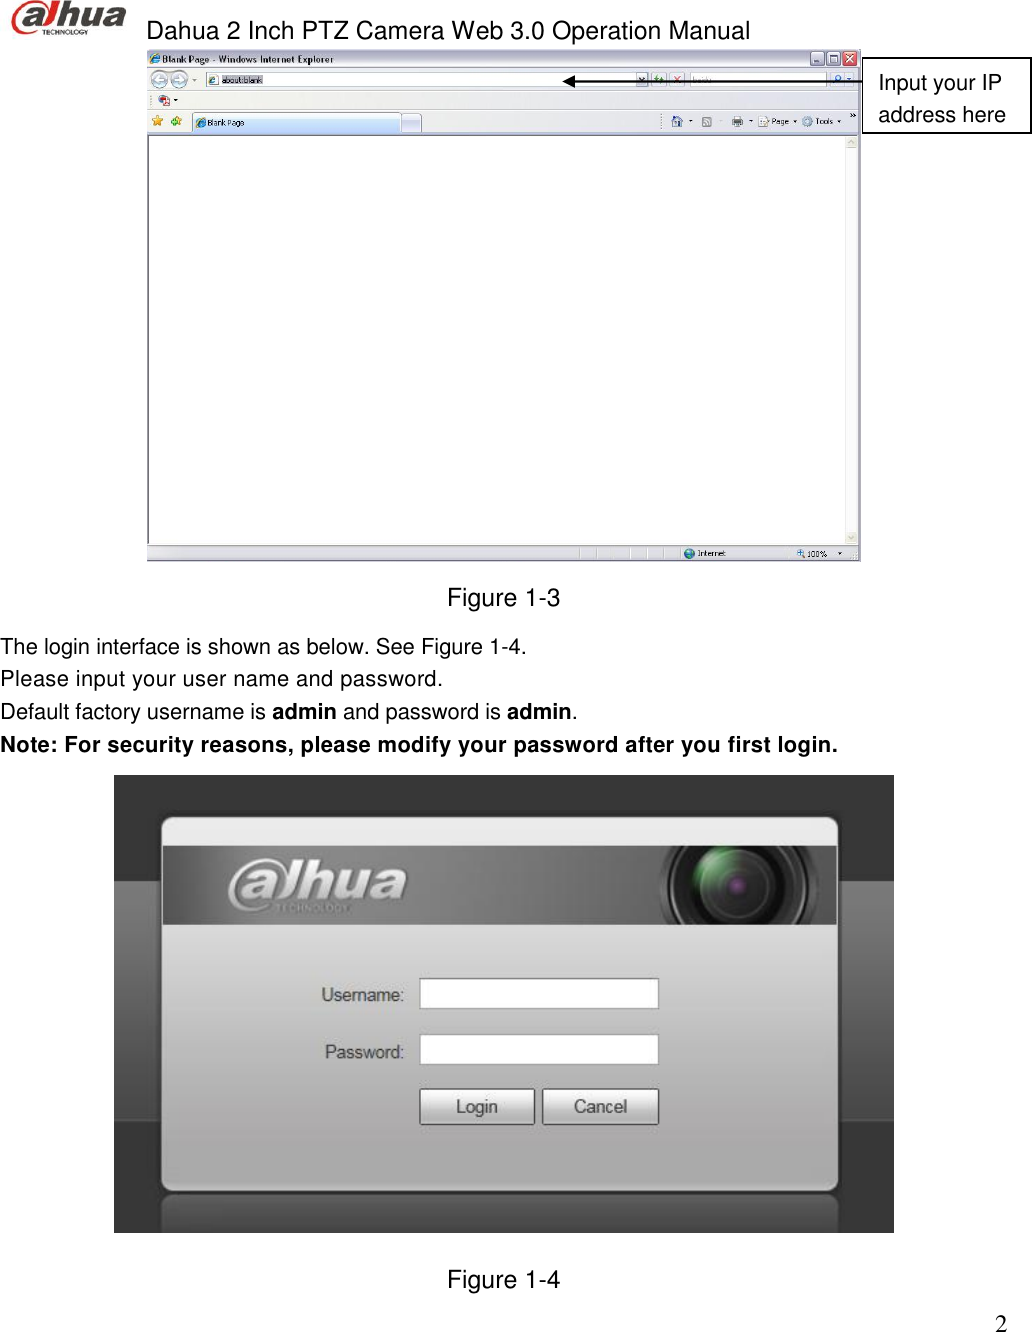  Dahua 2 Inch PTZ Camera Web 3.0 Operation Manual                                                                             2  Figure 1-3 The login interface is shown as below. See Figure 1-4. Please input your user name and password.  Default factory username is admin and password is admin.  Note: For security reasons, please modify your password after you first login.  Figure 1-4 Input your IP address here 